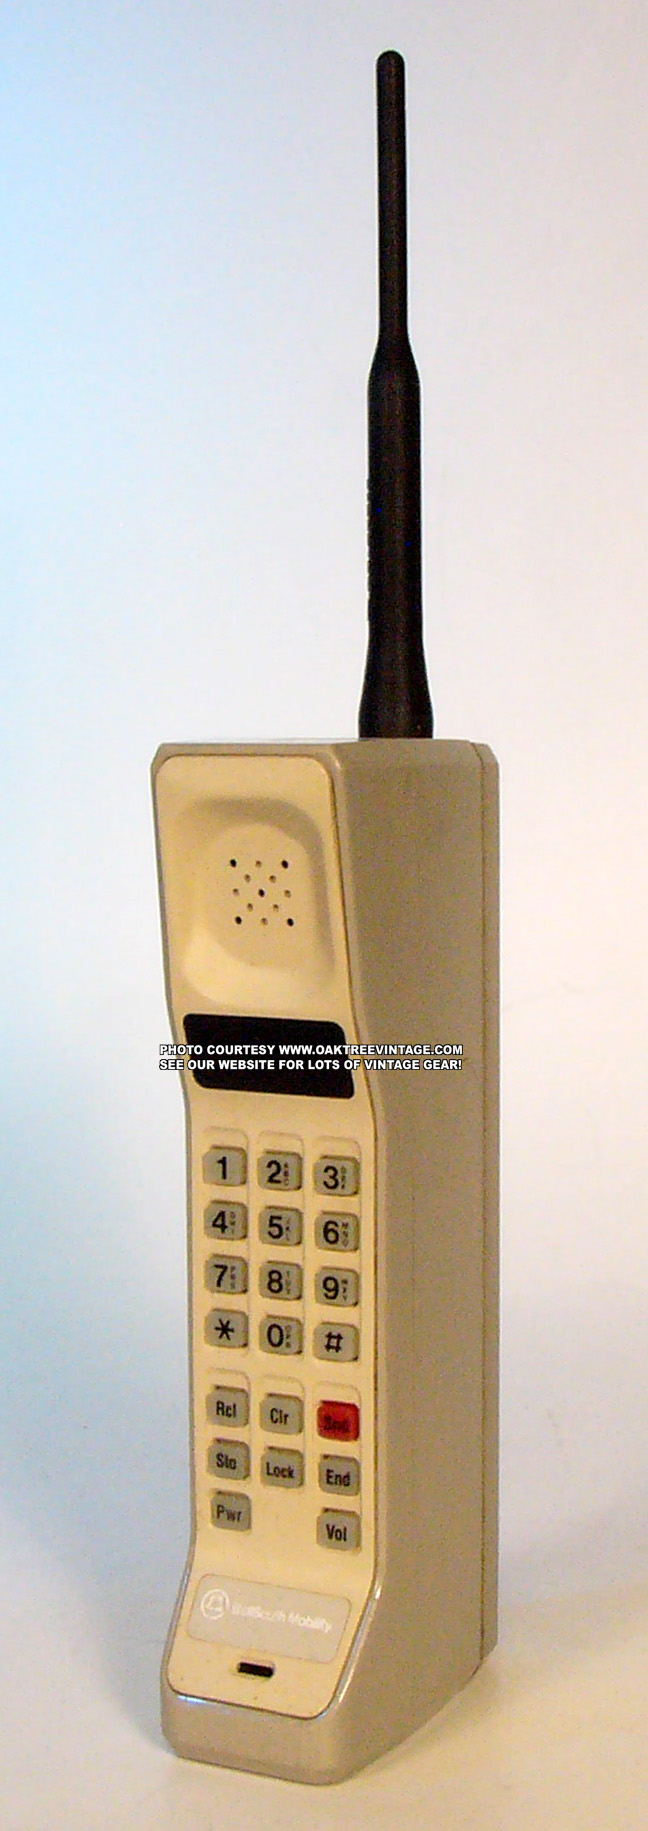 Nokia C15 Bag phone from early 90s 